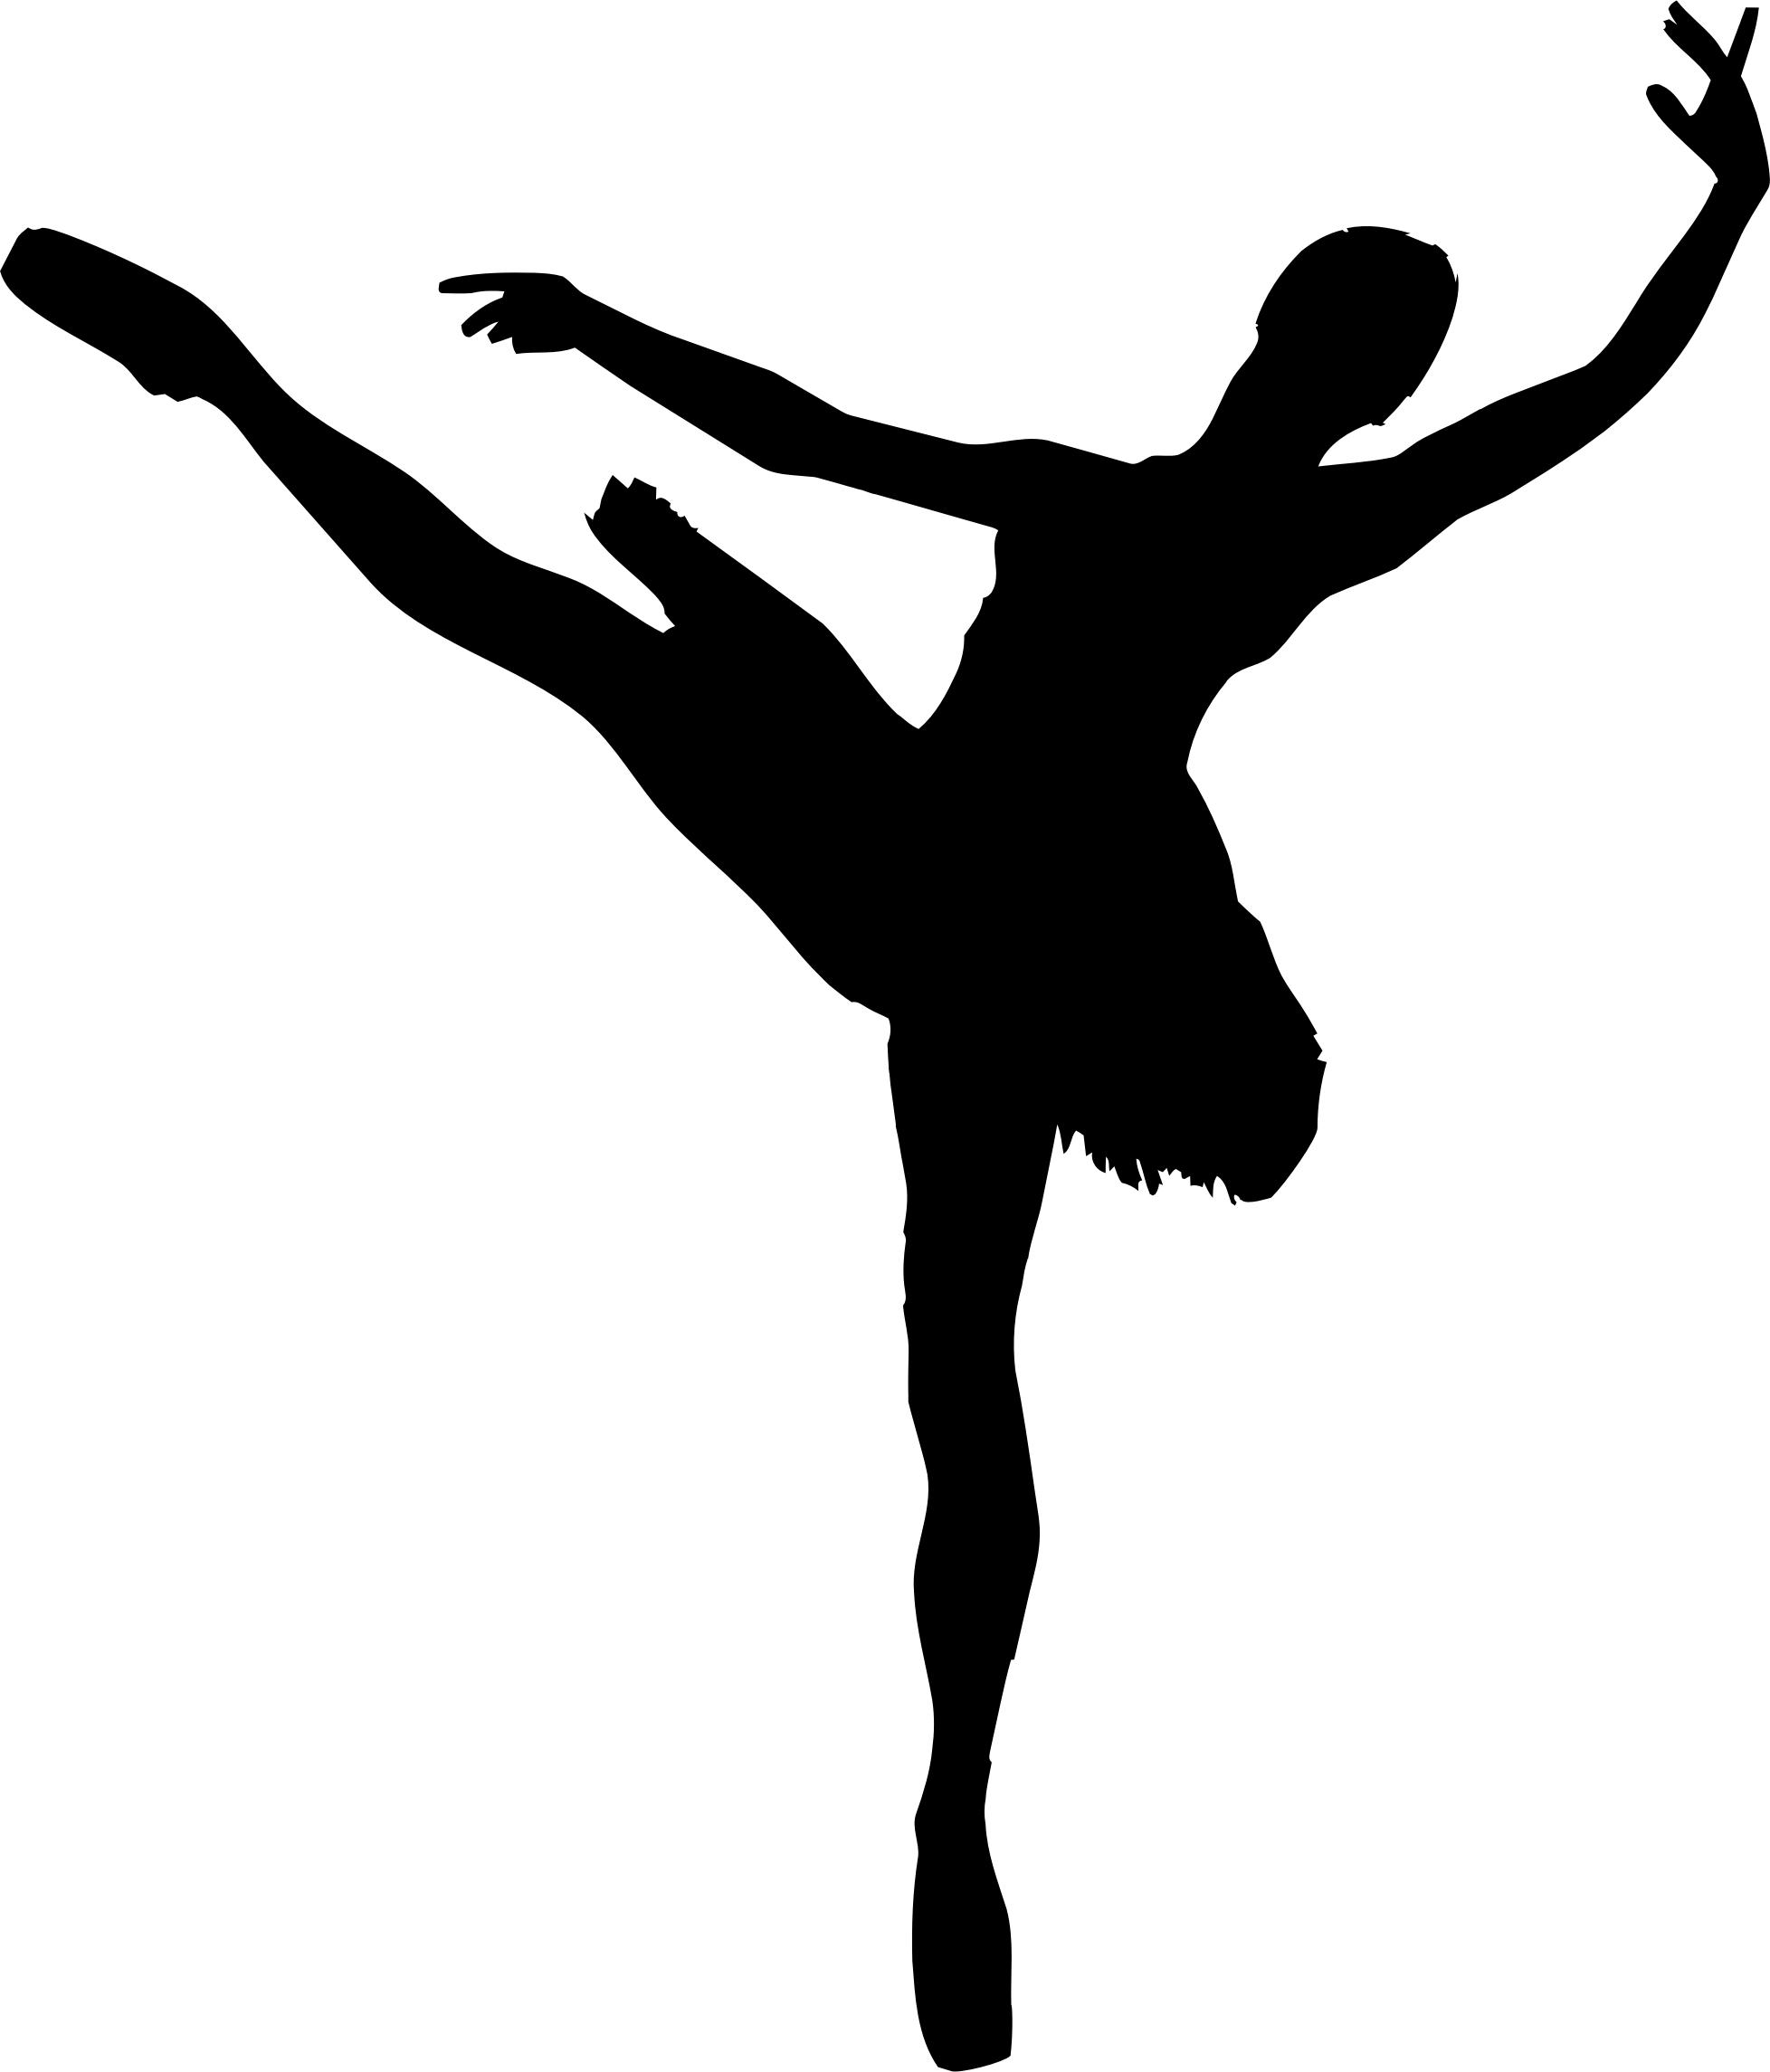 Woman And Man Ballet Silhouette Minus Man png